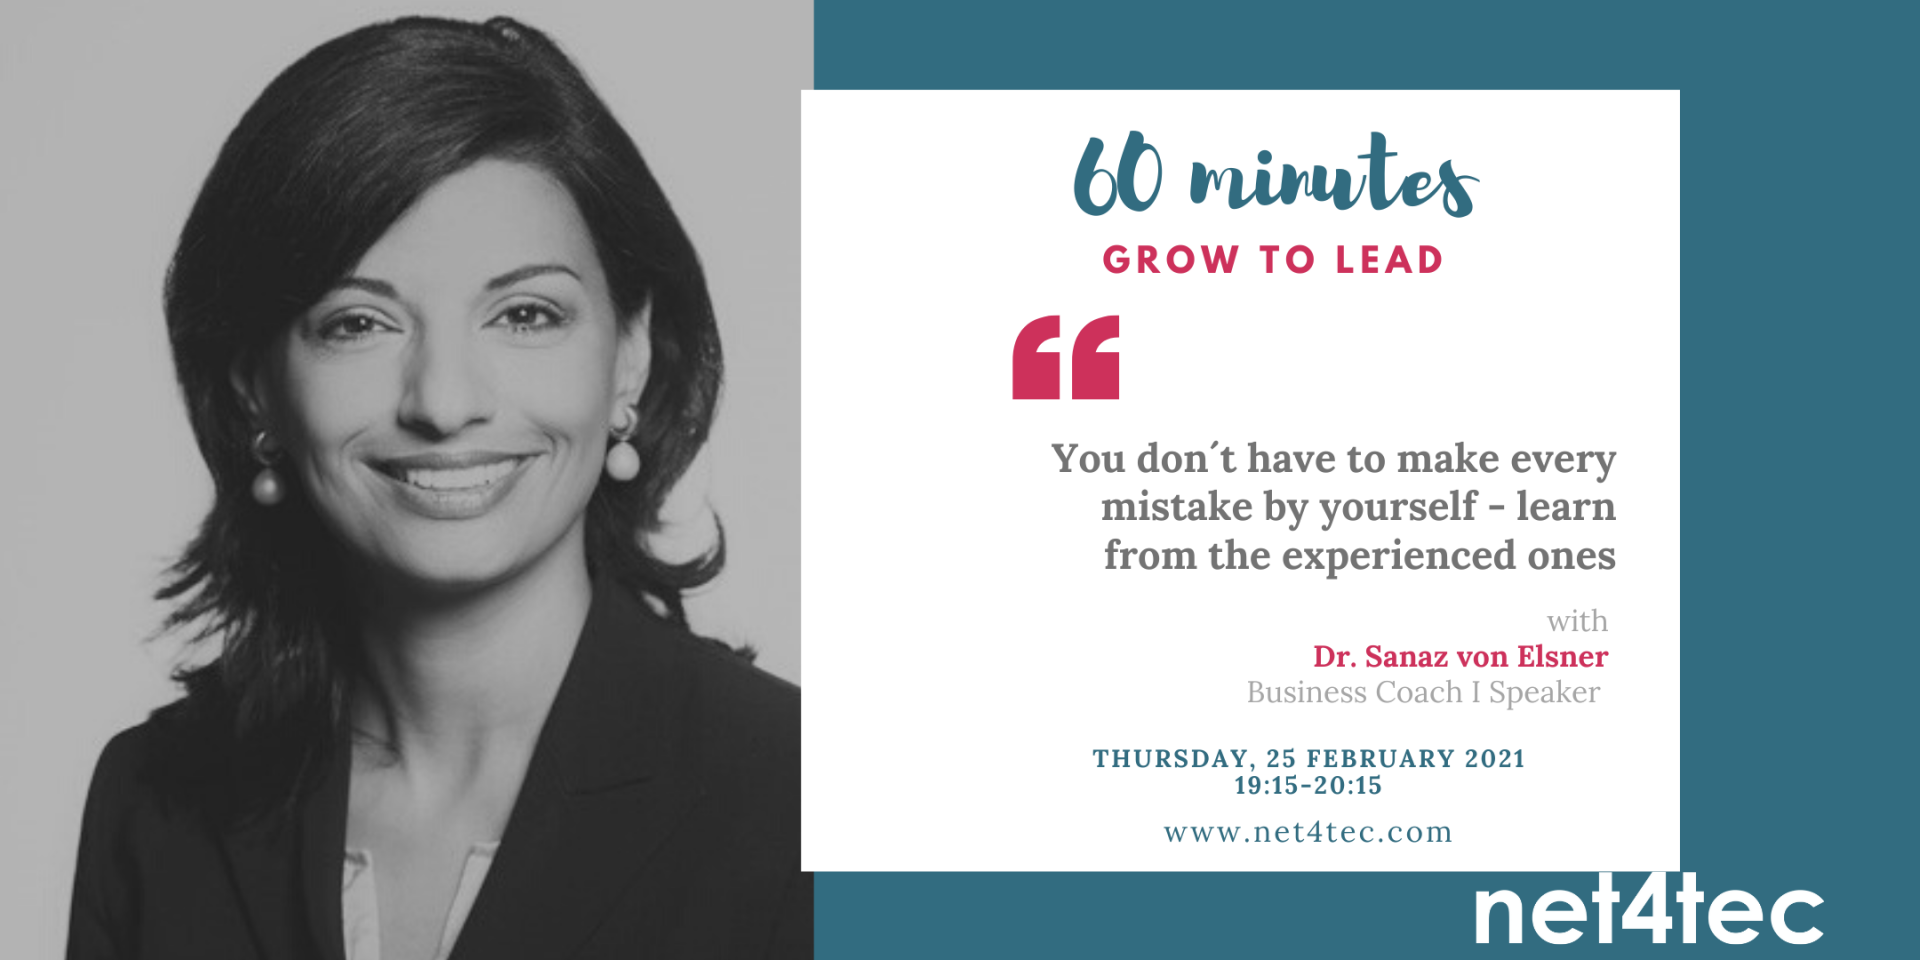 60' Grow to lead - Dr. Sanaz von Elsner "You don't have to make every mistake" | net4tec